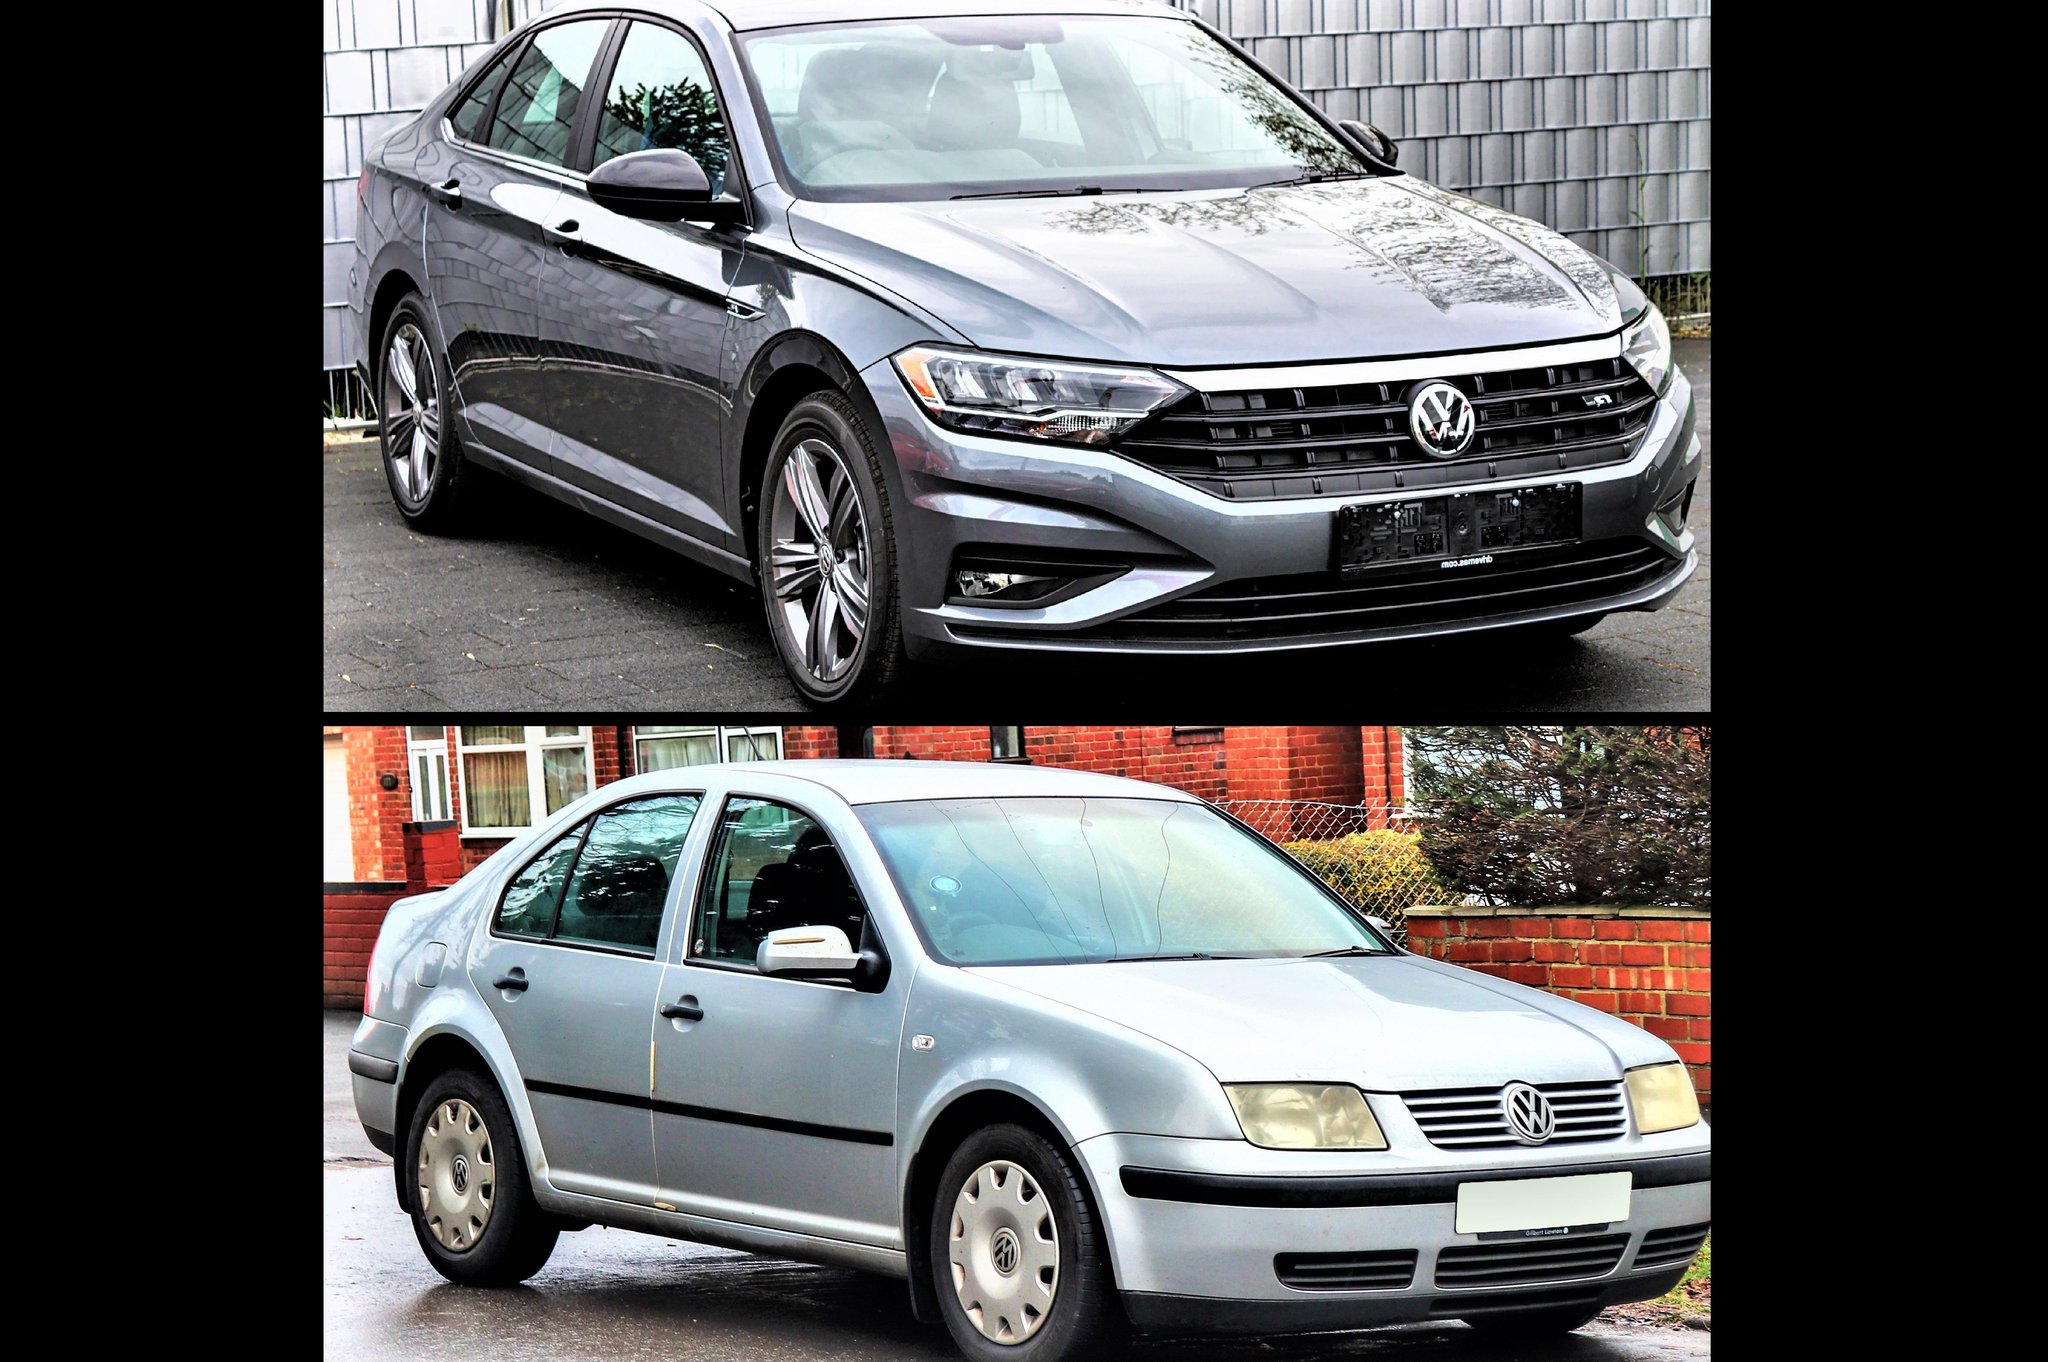 Hit-and-run alert: PSNI in search of VW Jetta / Bora as motorcyclist hospitalised